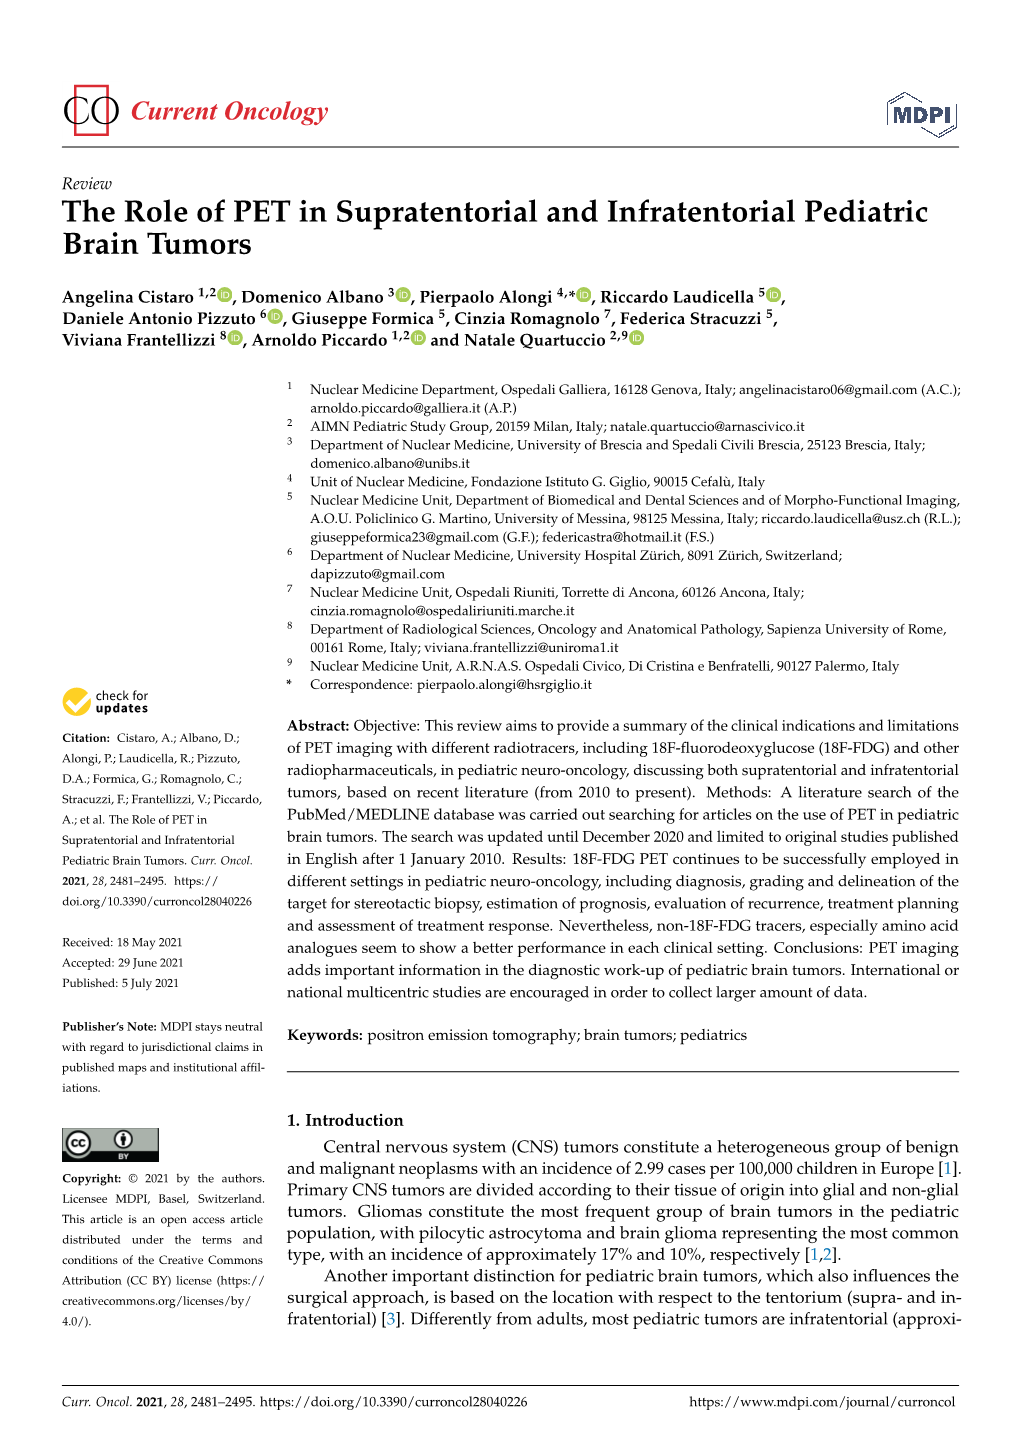 The Role of PET in Supratentorial and Infratentorial Pediatric Brain Tumors